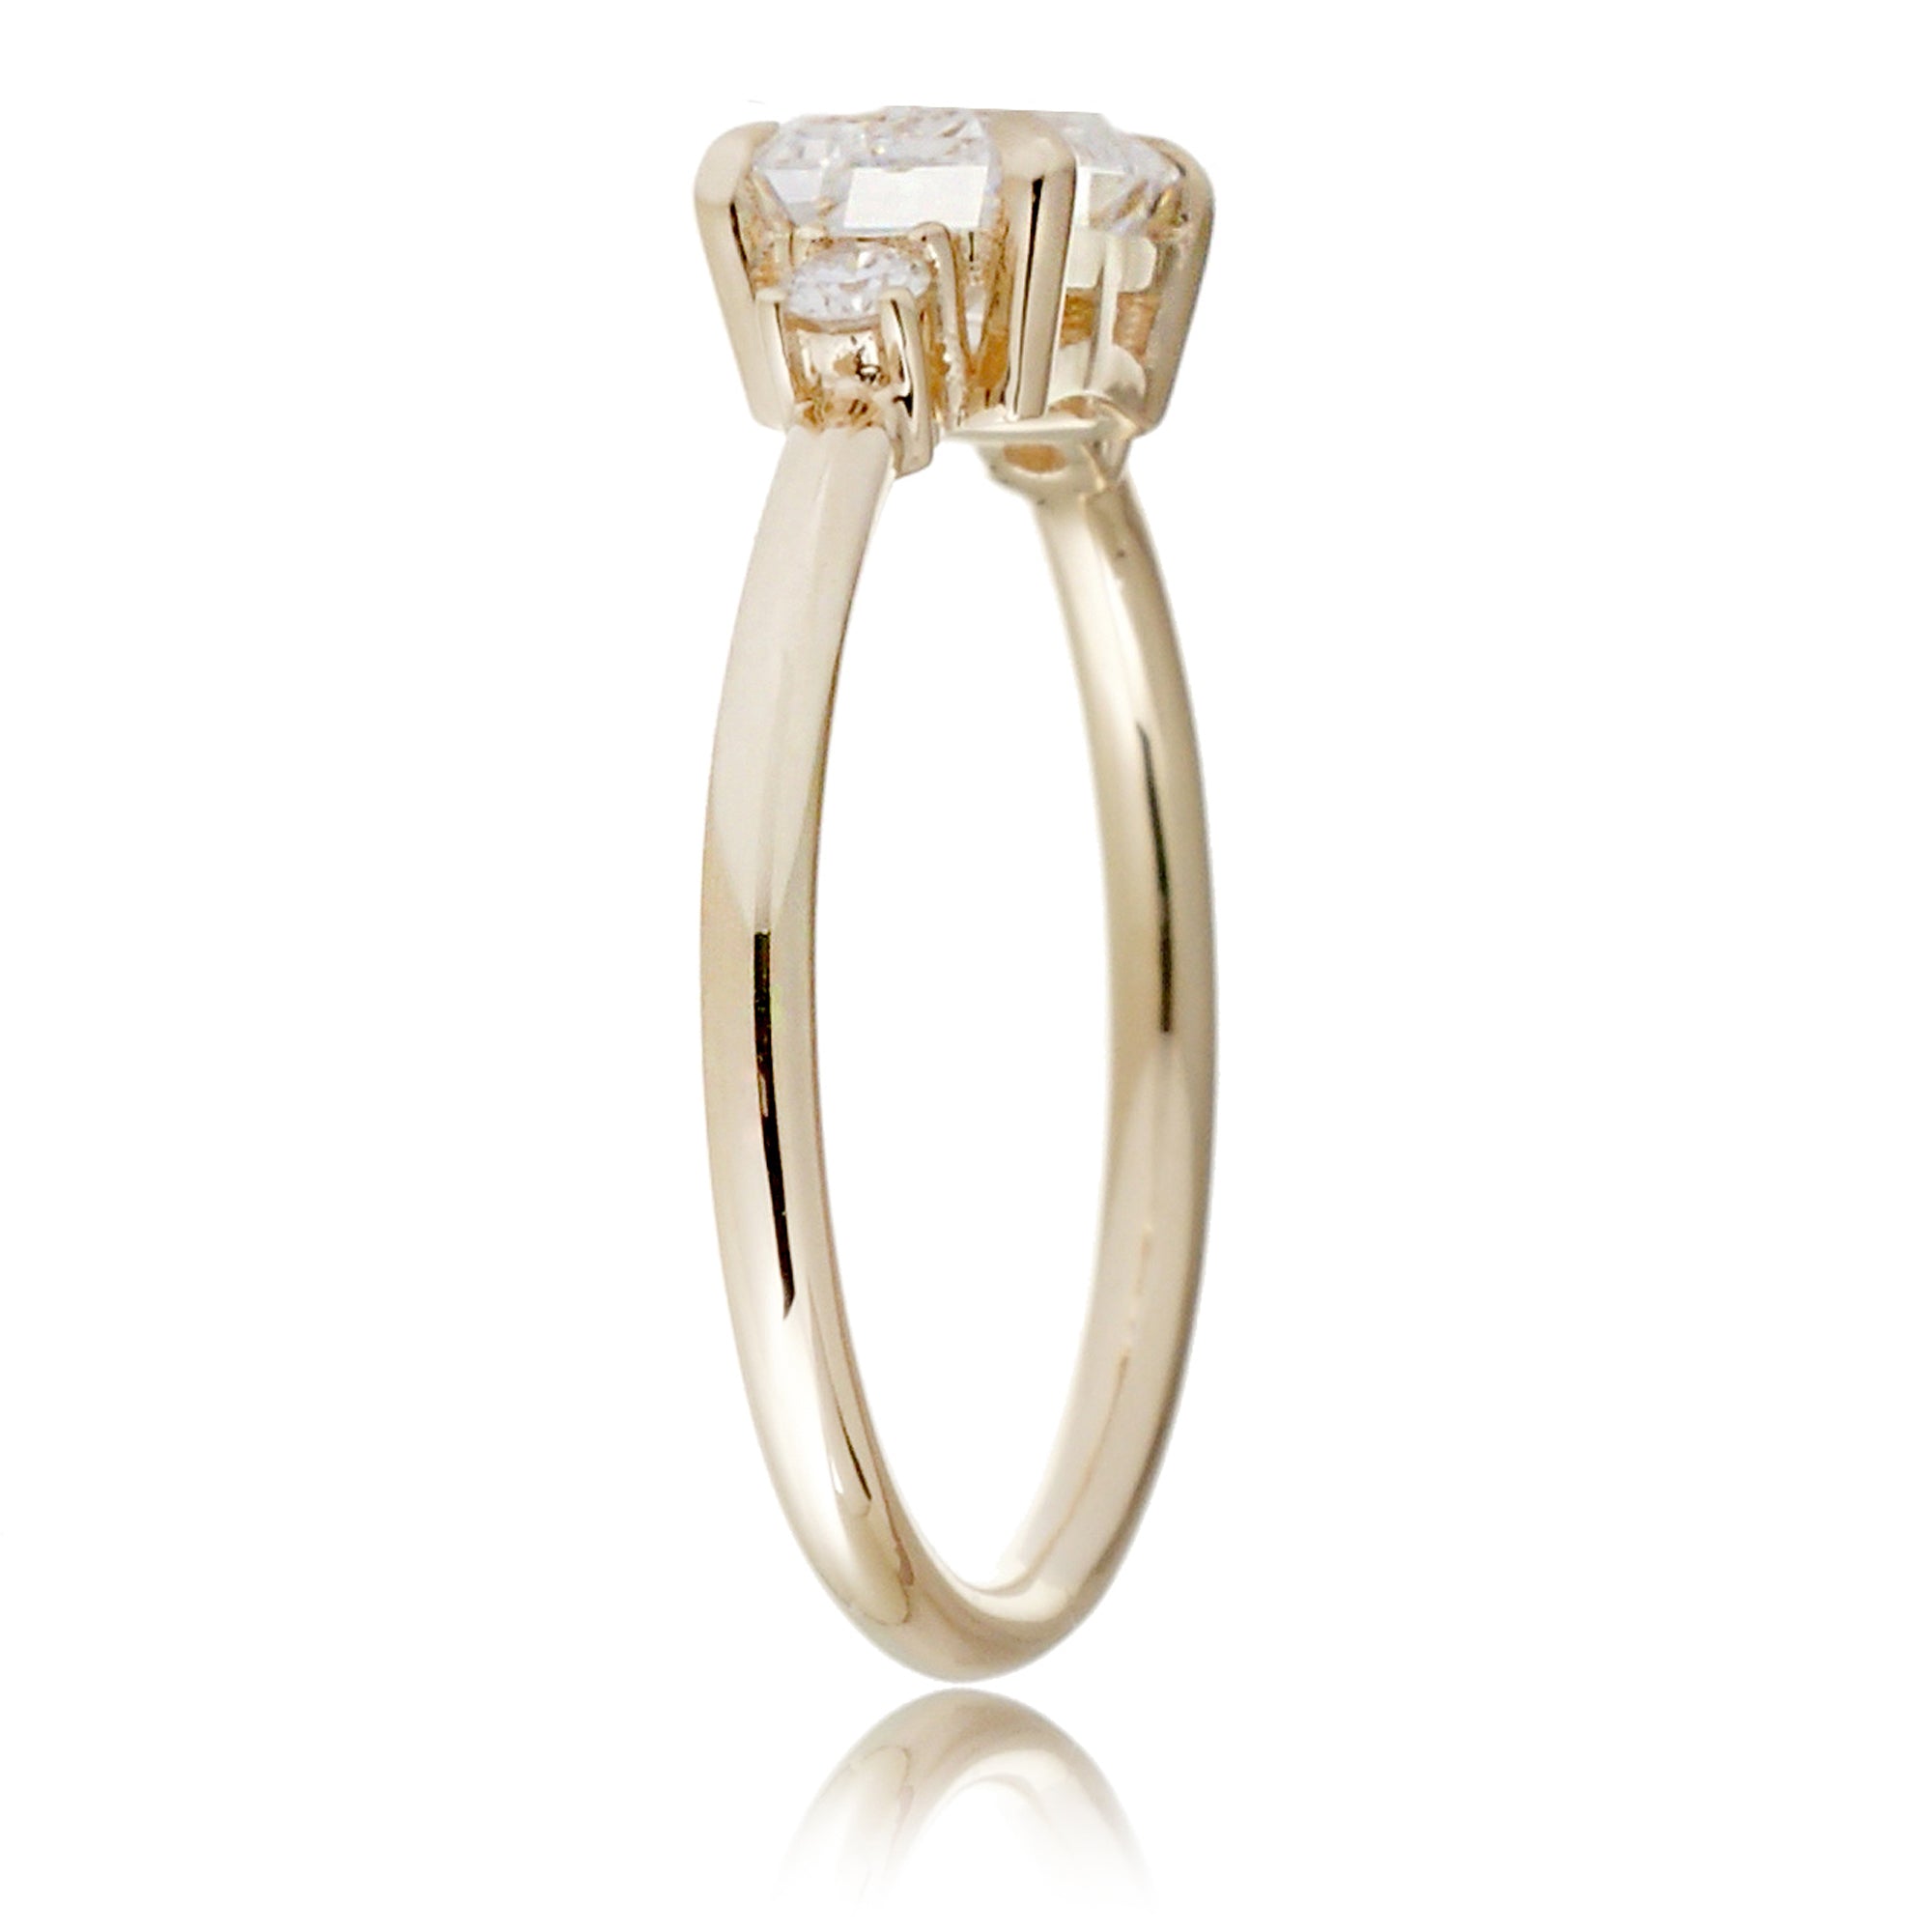 Radiant moissanite three stone east-west ring the Lena yellow gold